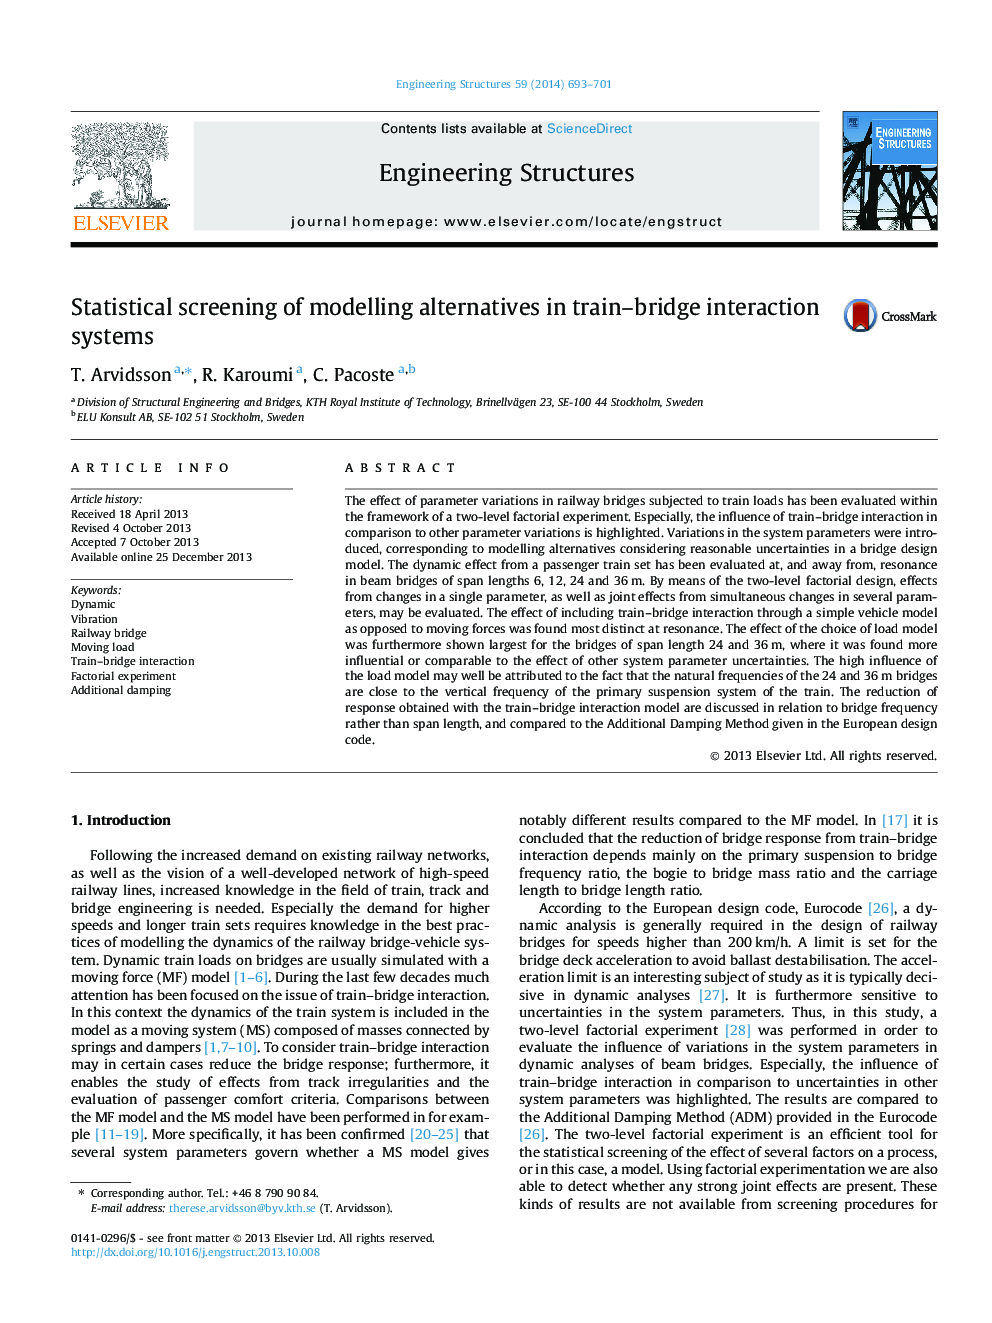 Statistical screening of modelling alternatives in train-bridge interaction systems